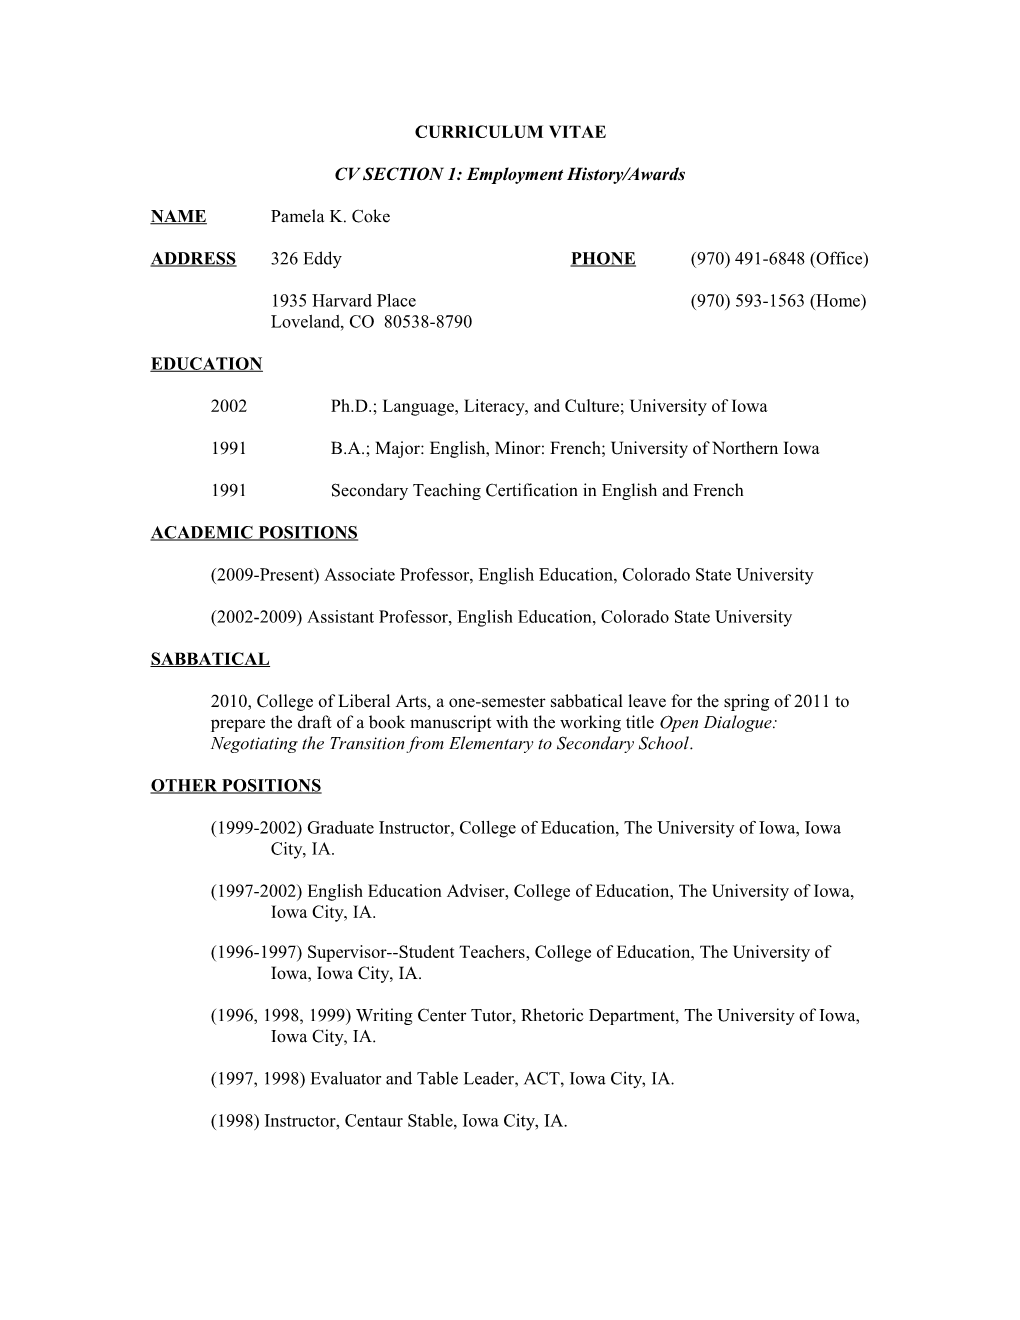 CV SECTION 1: Employment History/Awards